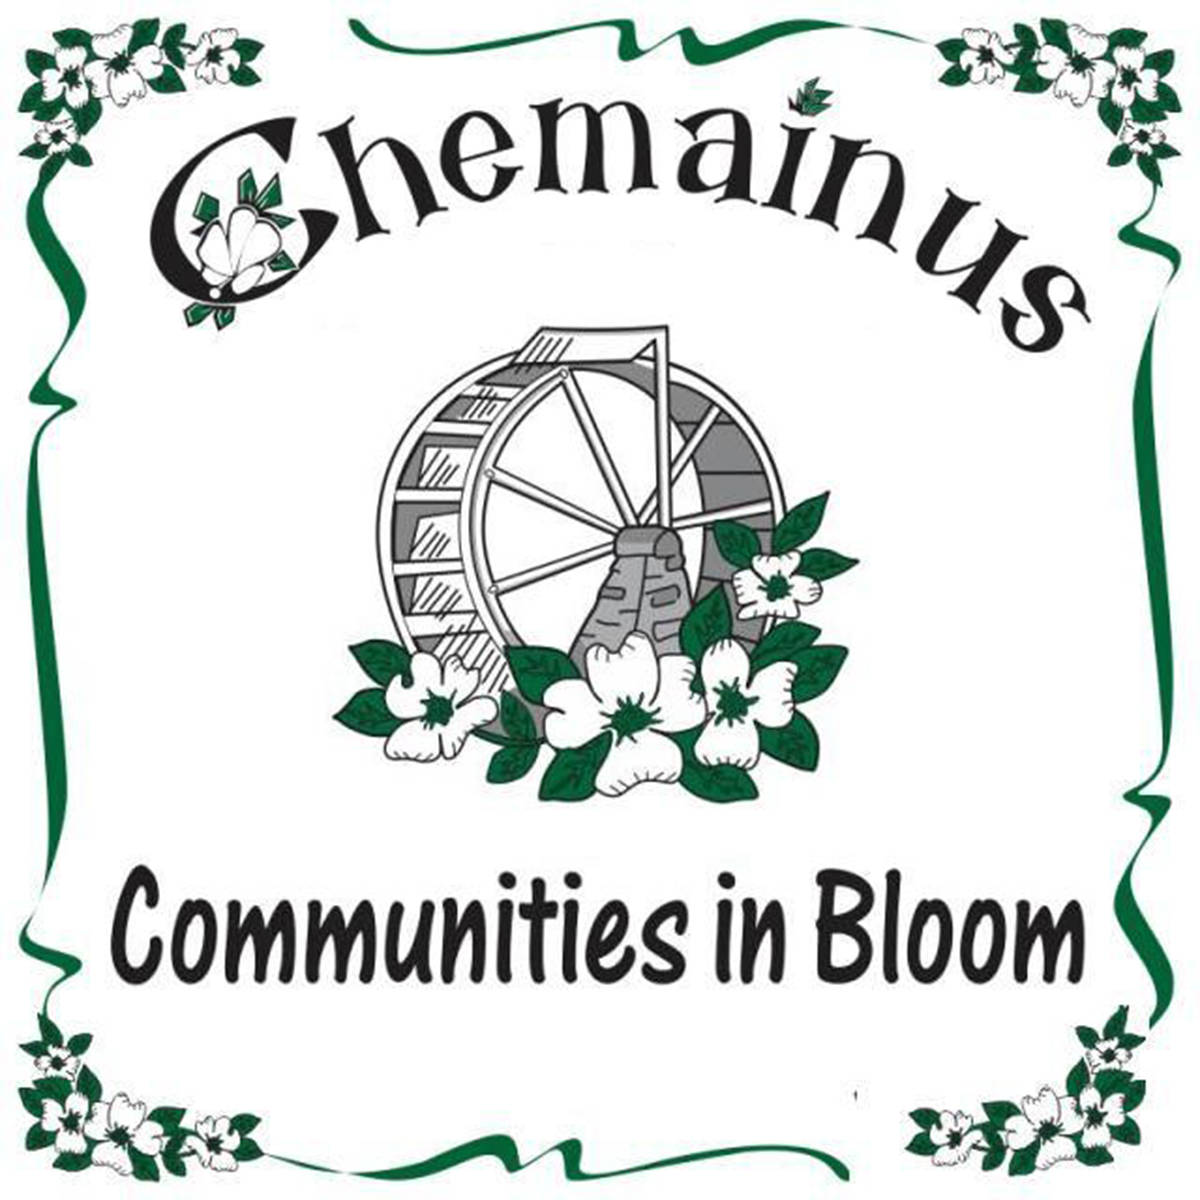 22497293_web1_200827-CHC-Communities-In-Bloom-events_1